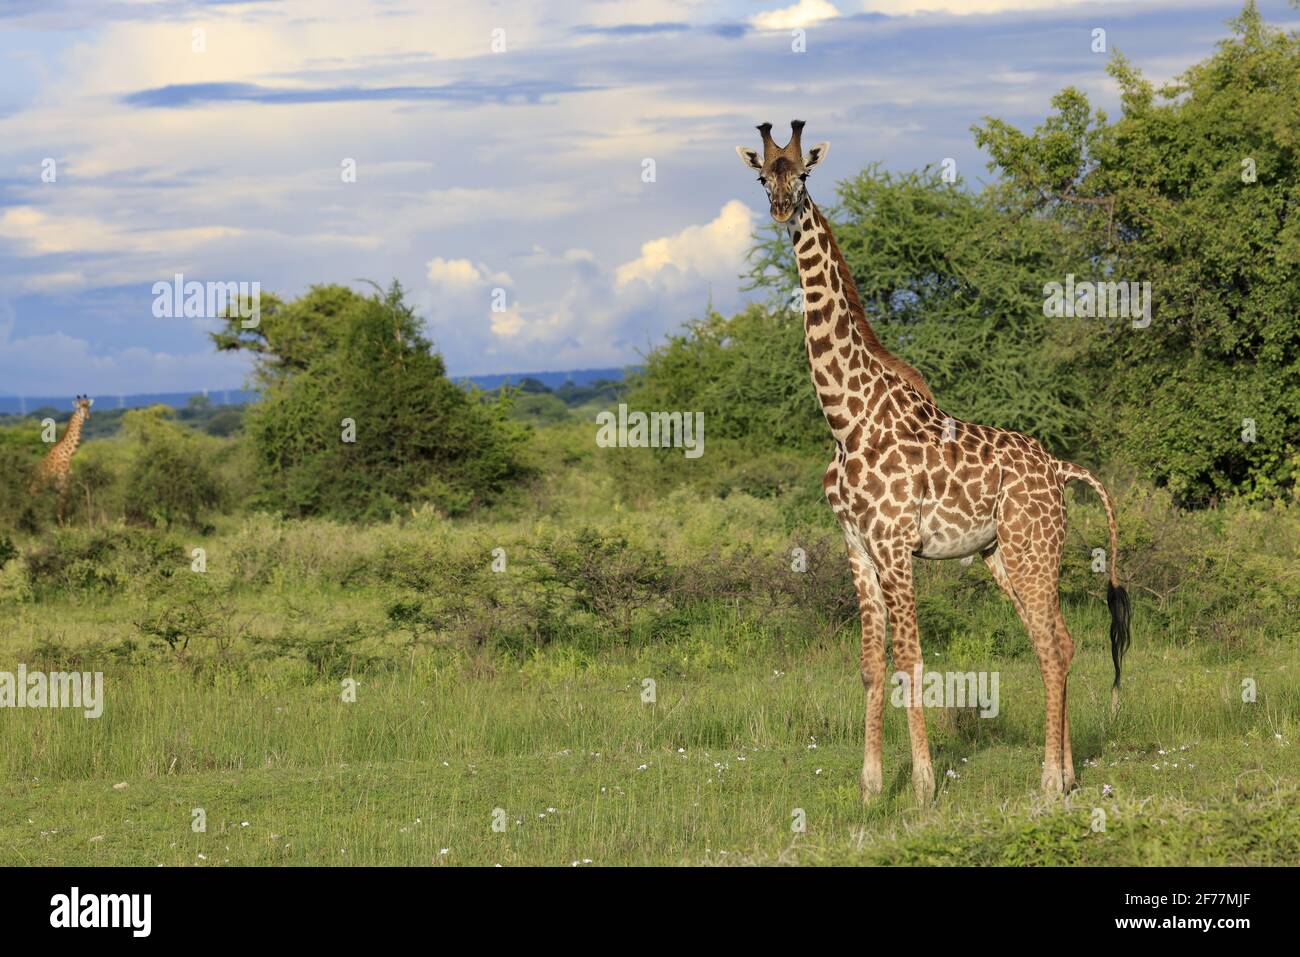 Tanzania, Manyara Ranch, Arusha region, We meet many giraffes in the plain of Manyara Ranch ,, Manyara Conservancy (150 KM2) is a pioneering project combining wildlife protection and sustainable management of tourism for the benefit of local communities Stock Photo